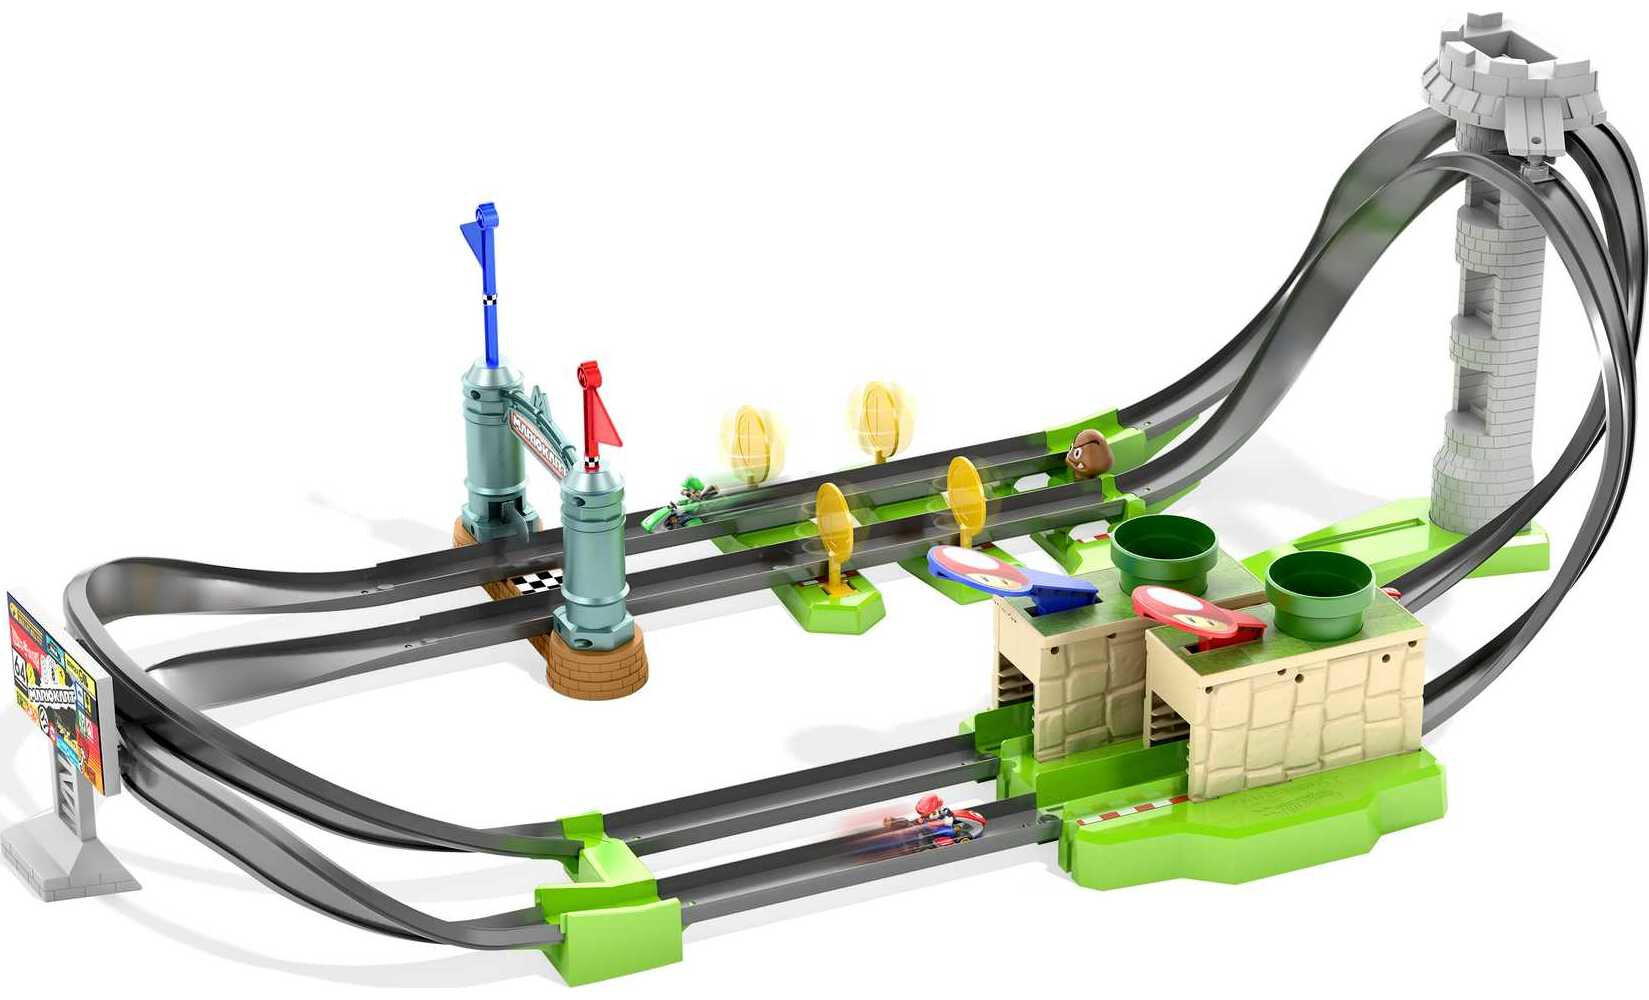 Hot Wheels Mario Kart Circuit Lite Track Set with 1:64 Scale Toy Die-Cast Kart Vehicle & Launcher - image 1 of 7